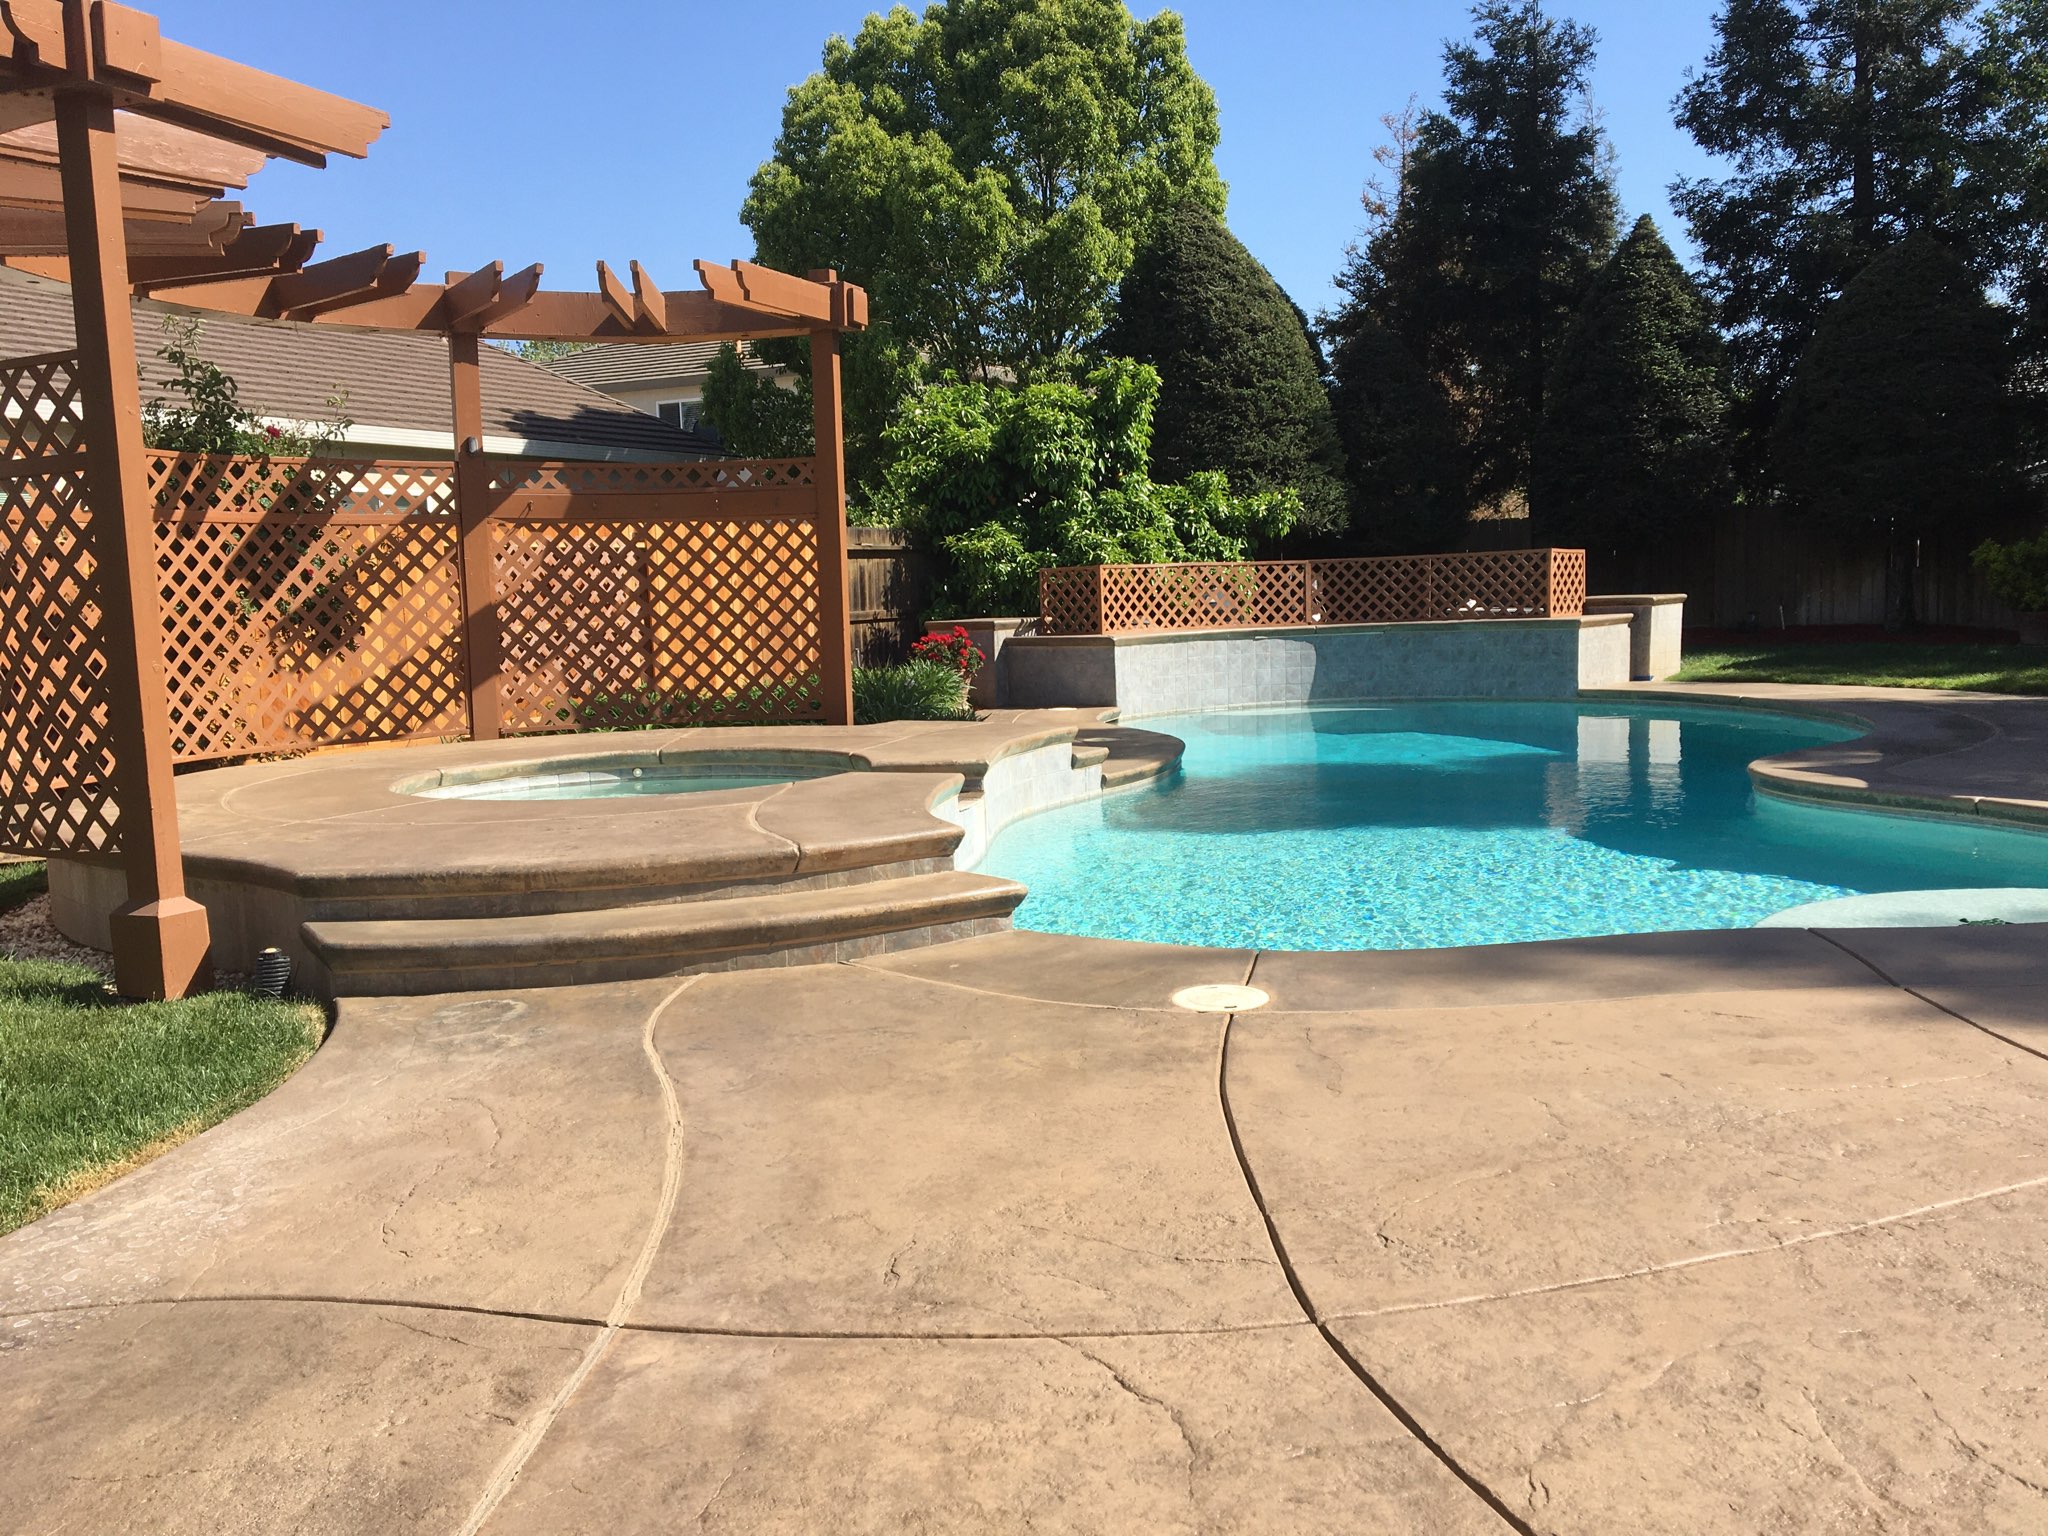 Resurfaced Stamped Concrete Pool Deck with Khaki Stain